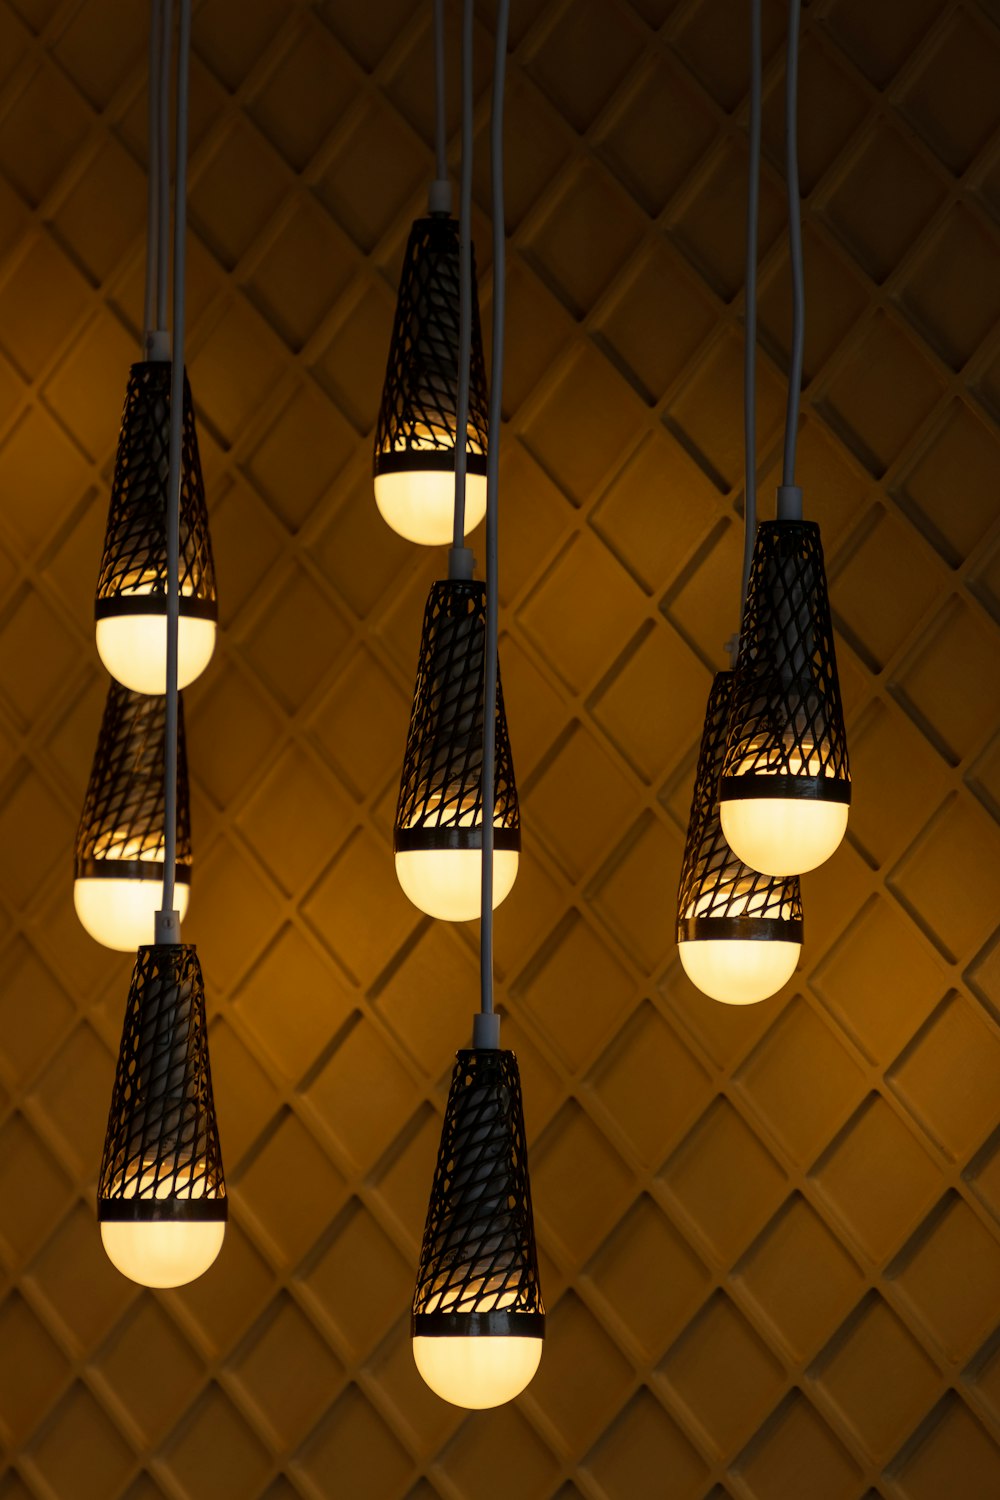 eight pendant lamps turned on